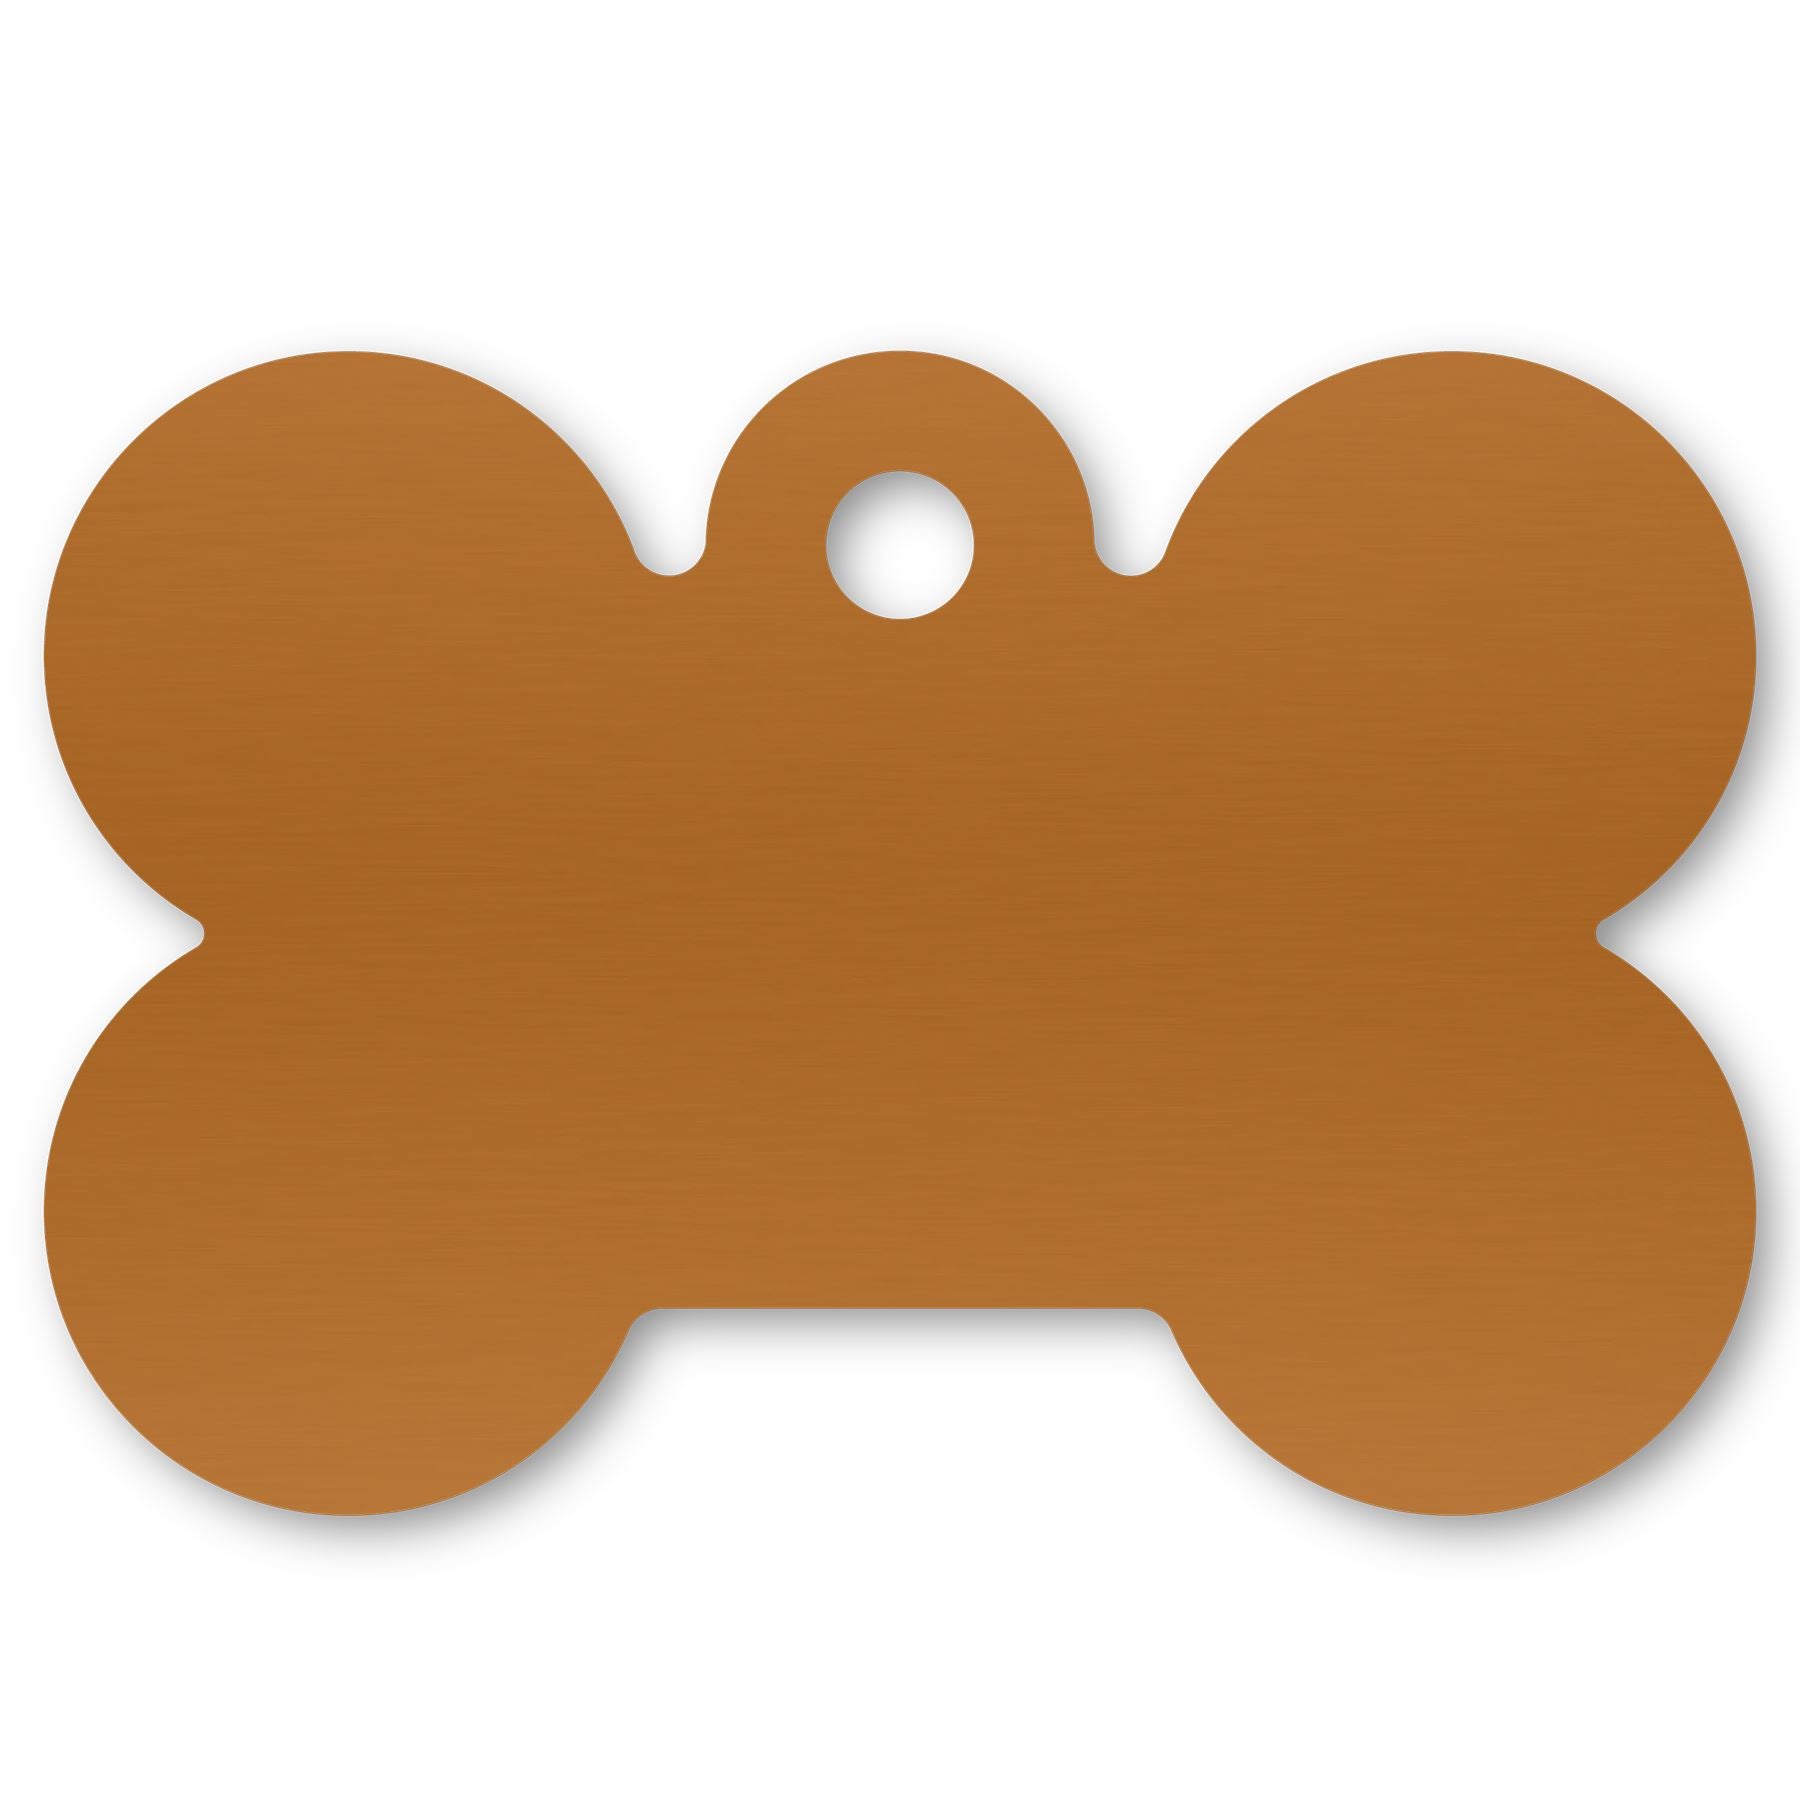 Anodized Aluminum Dog Bone Shaped Tags, 7/8" x 1-3/16" with 3/32" Hole, Laser Engraved Metal Tags Craftworks NW Orange 